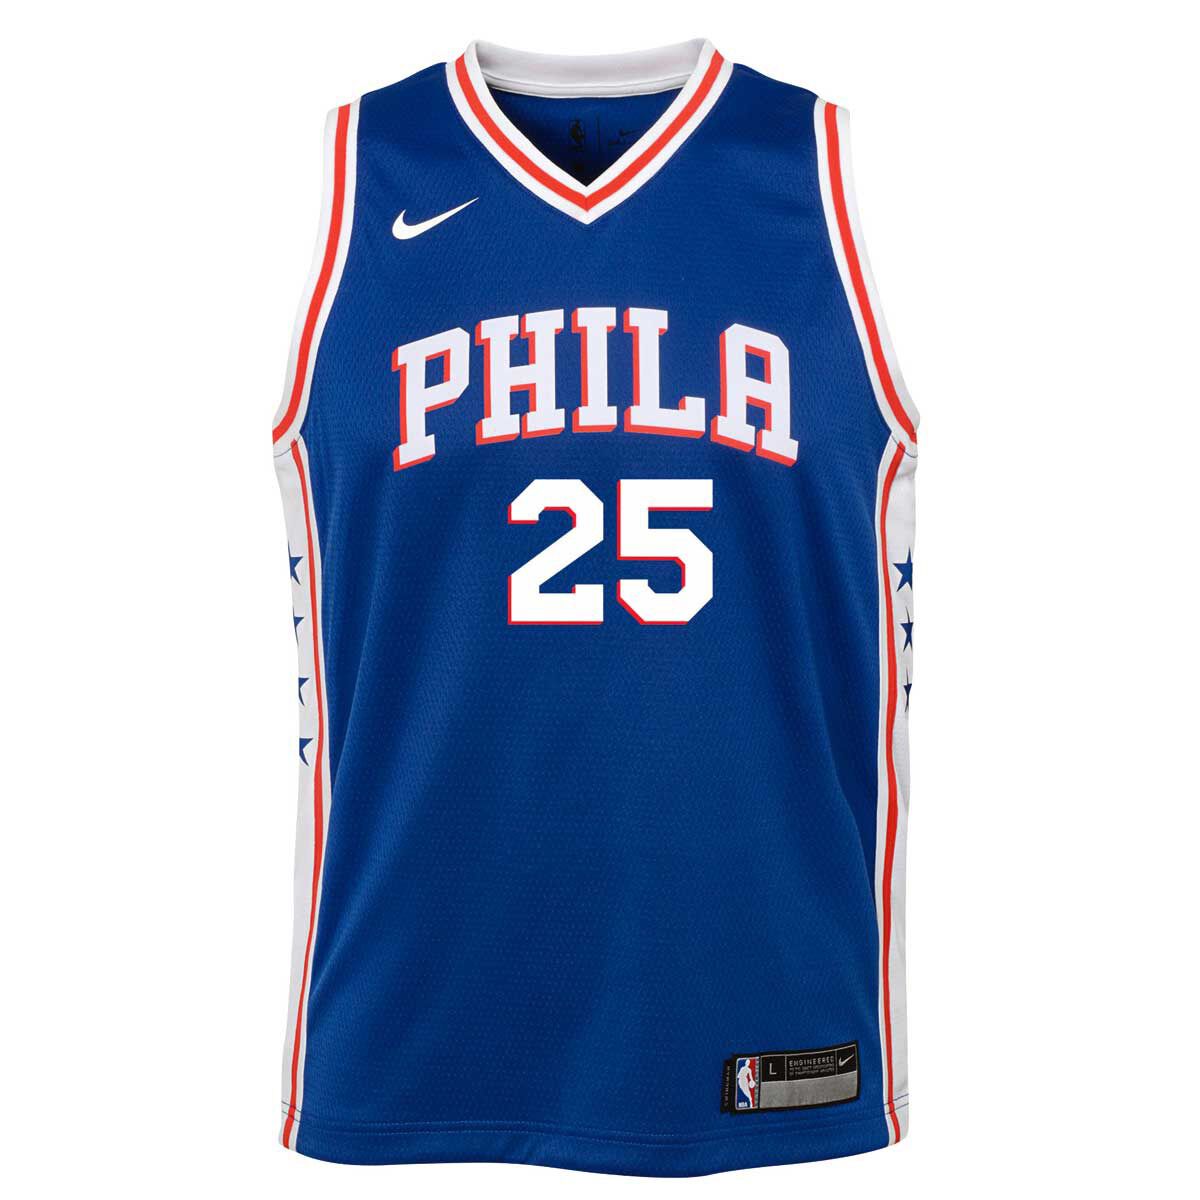 76ers simmons jersey